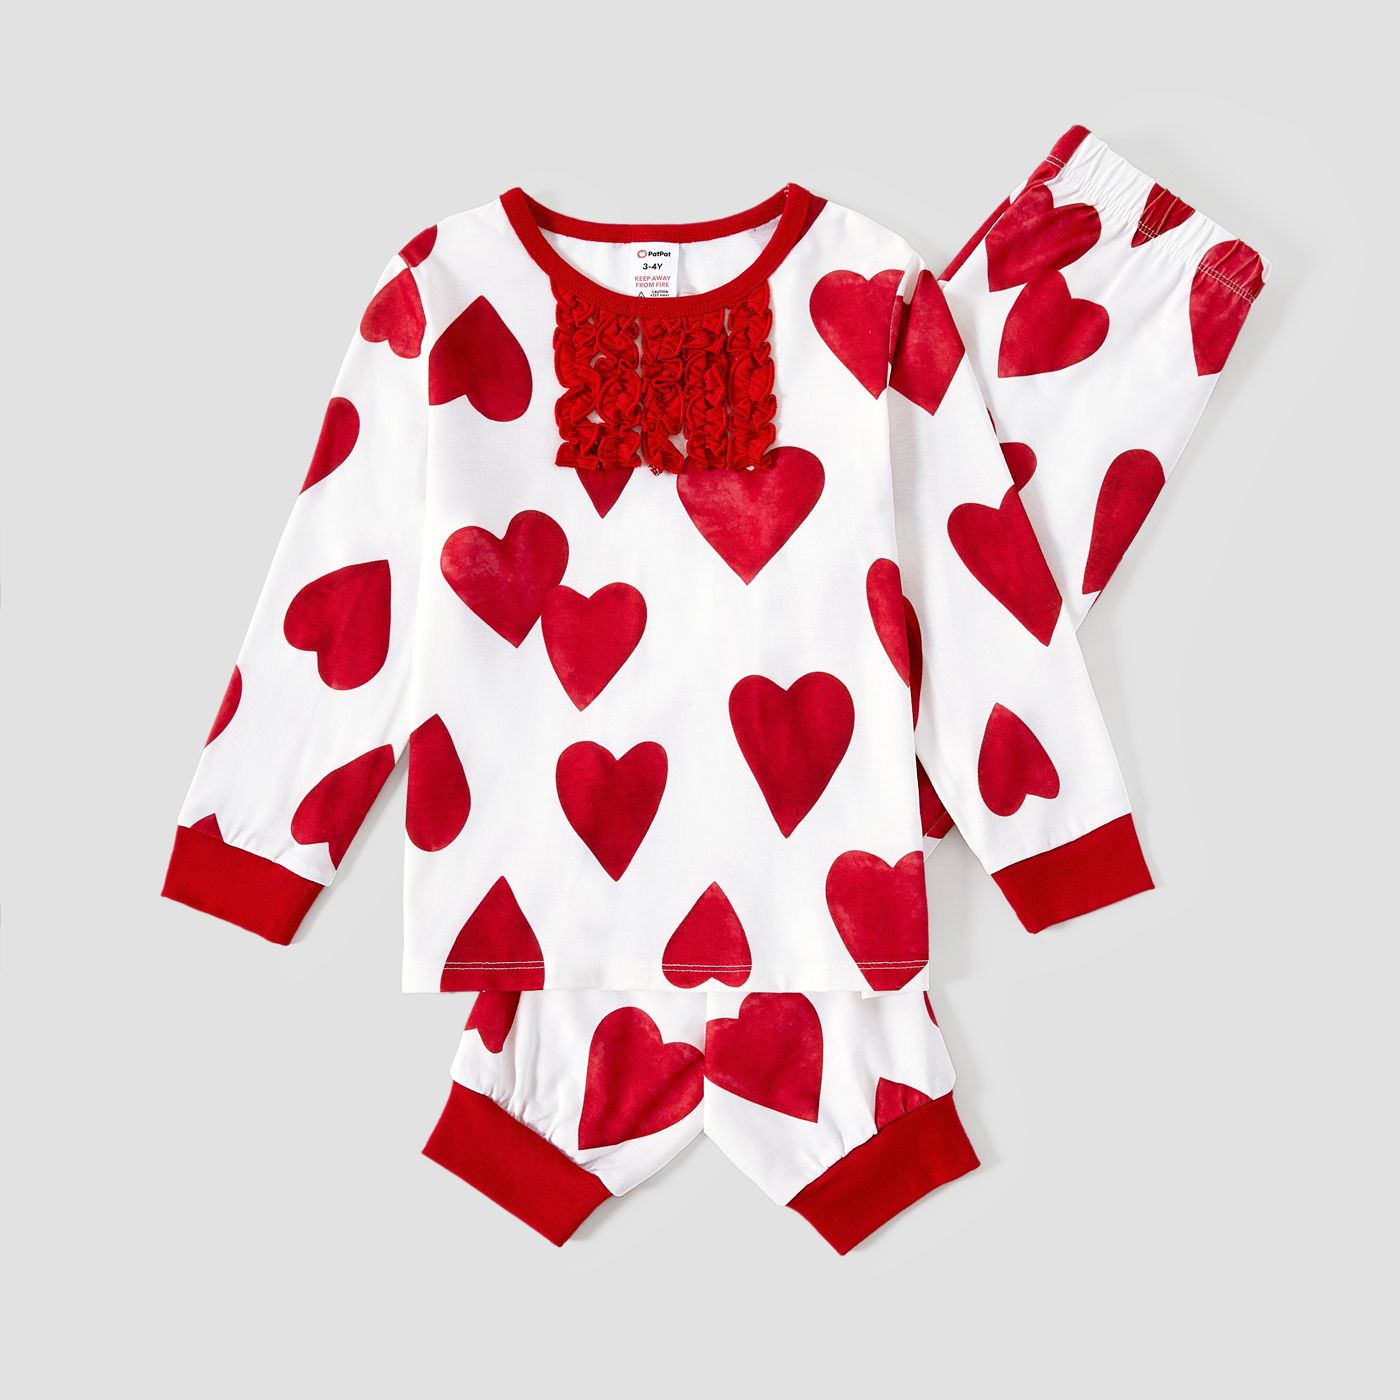 Valentine's Day Family Matching Heart Pattern Stripe Crew Neck Pajamas (Flame Resistant)